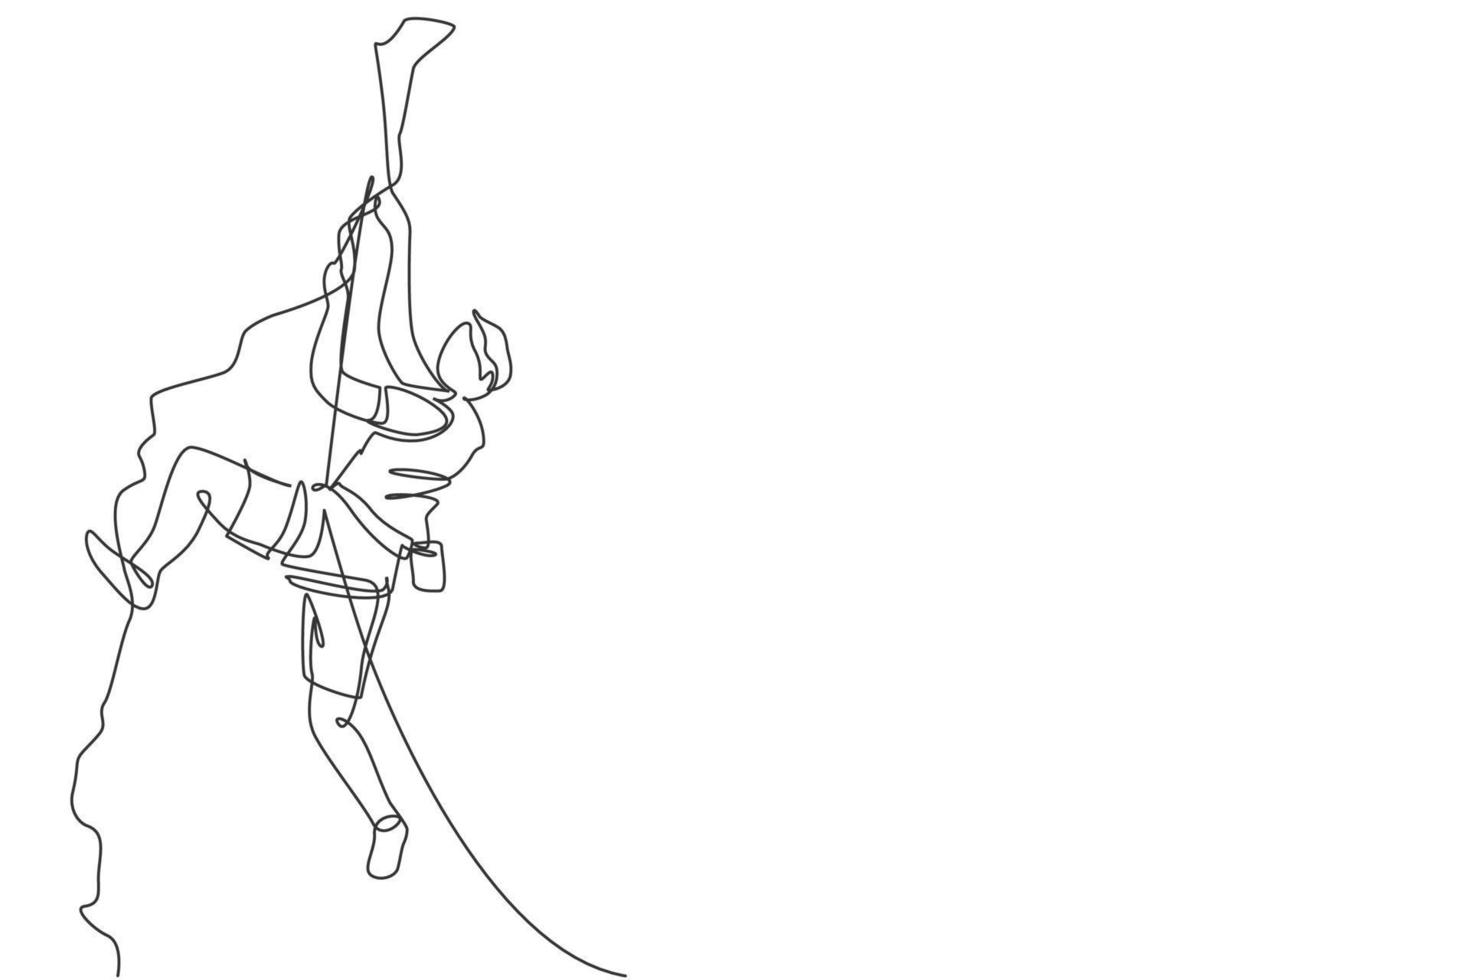 Single continuous line drawing of young muscular rockclimber man climbing hanging on mountain grip. Outdoor active lifestyle and rock climbing concept. Trendy one line draw design vector illustration